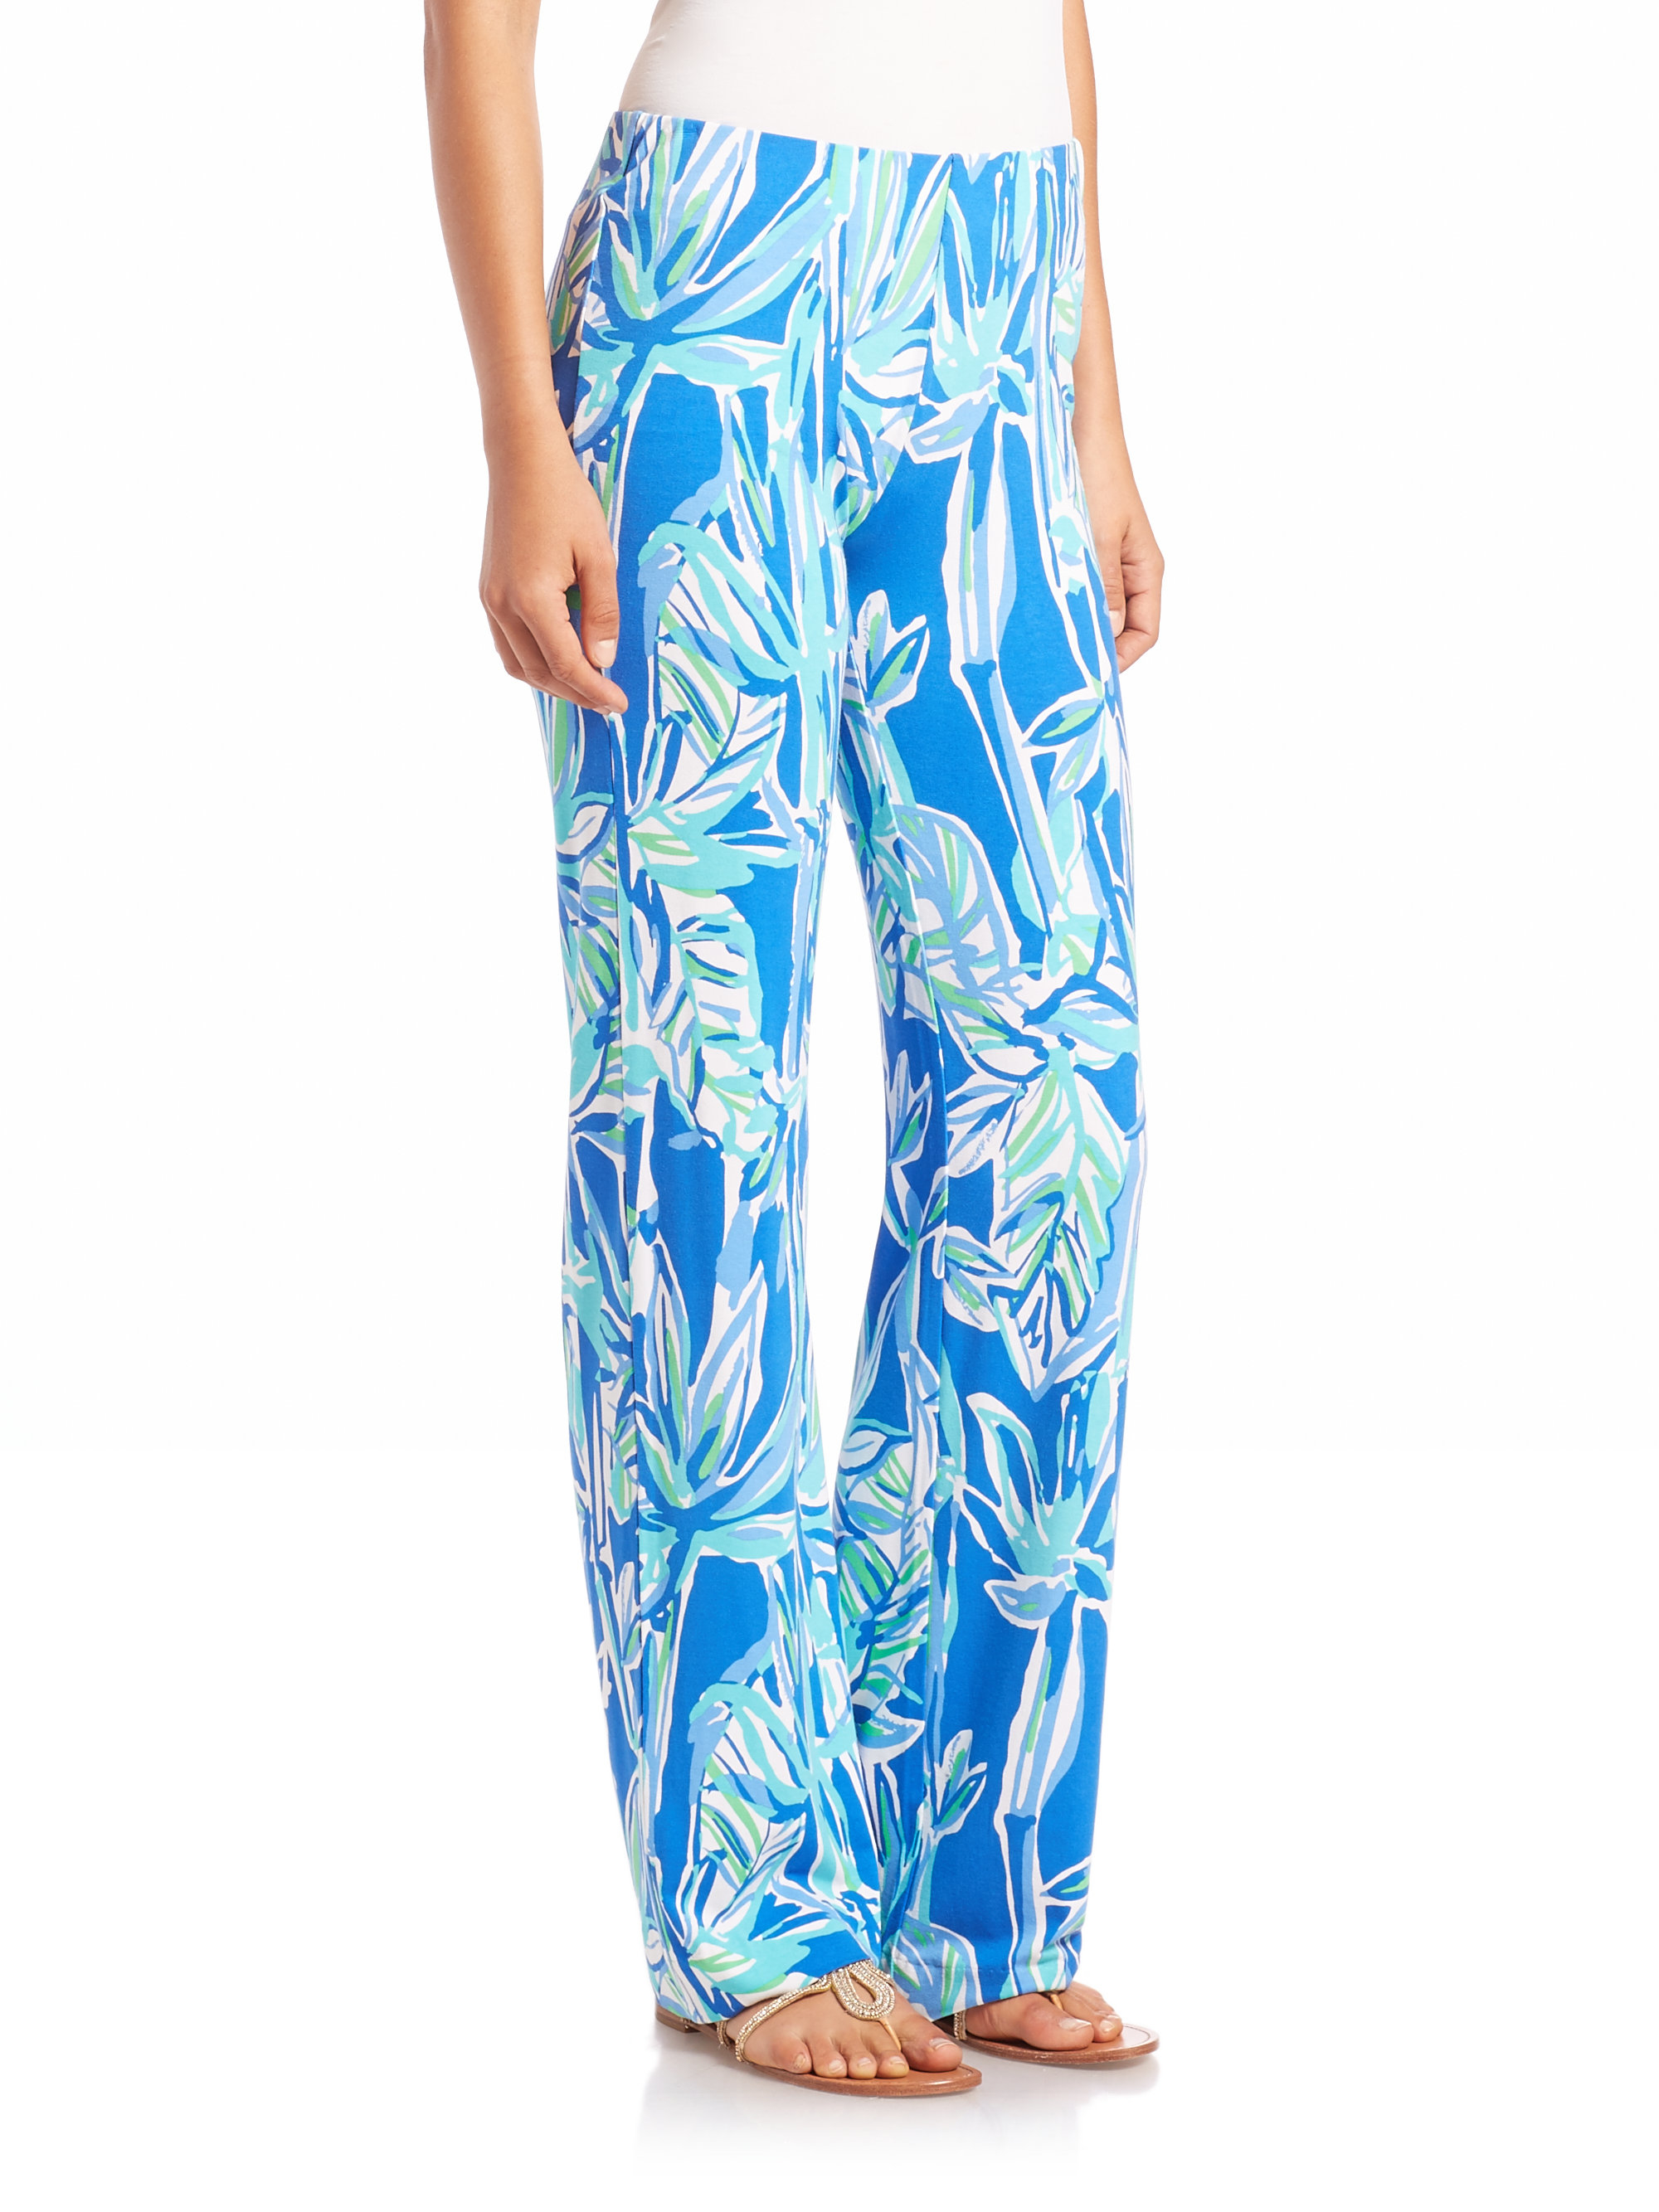 Lyst - Lilly Pulitzer Georgia May Palazzo Pants in Blue